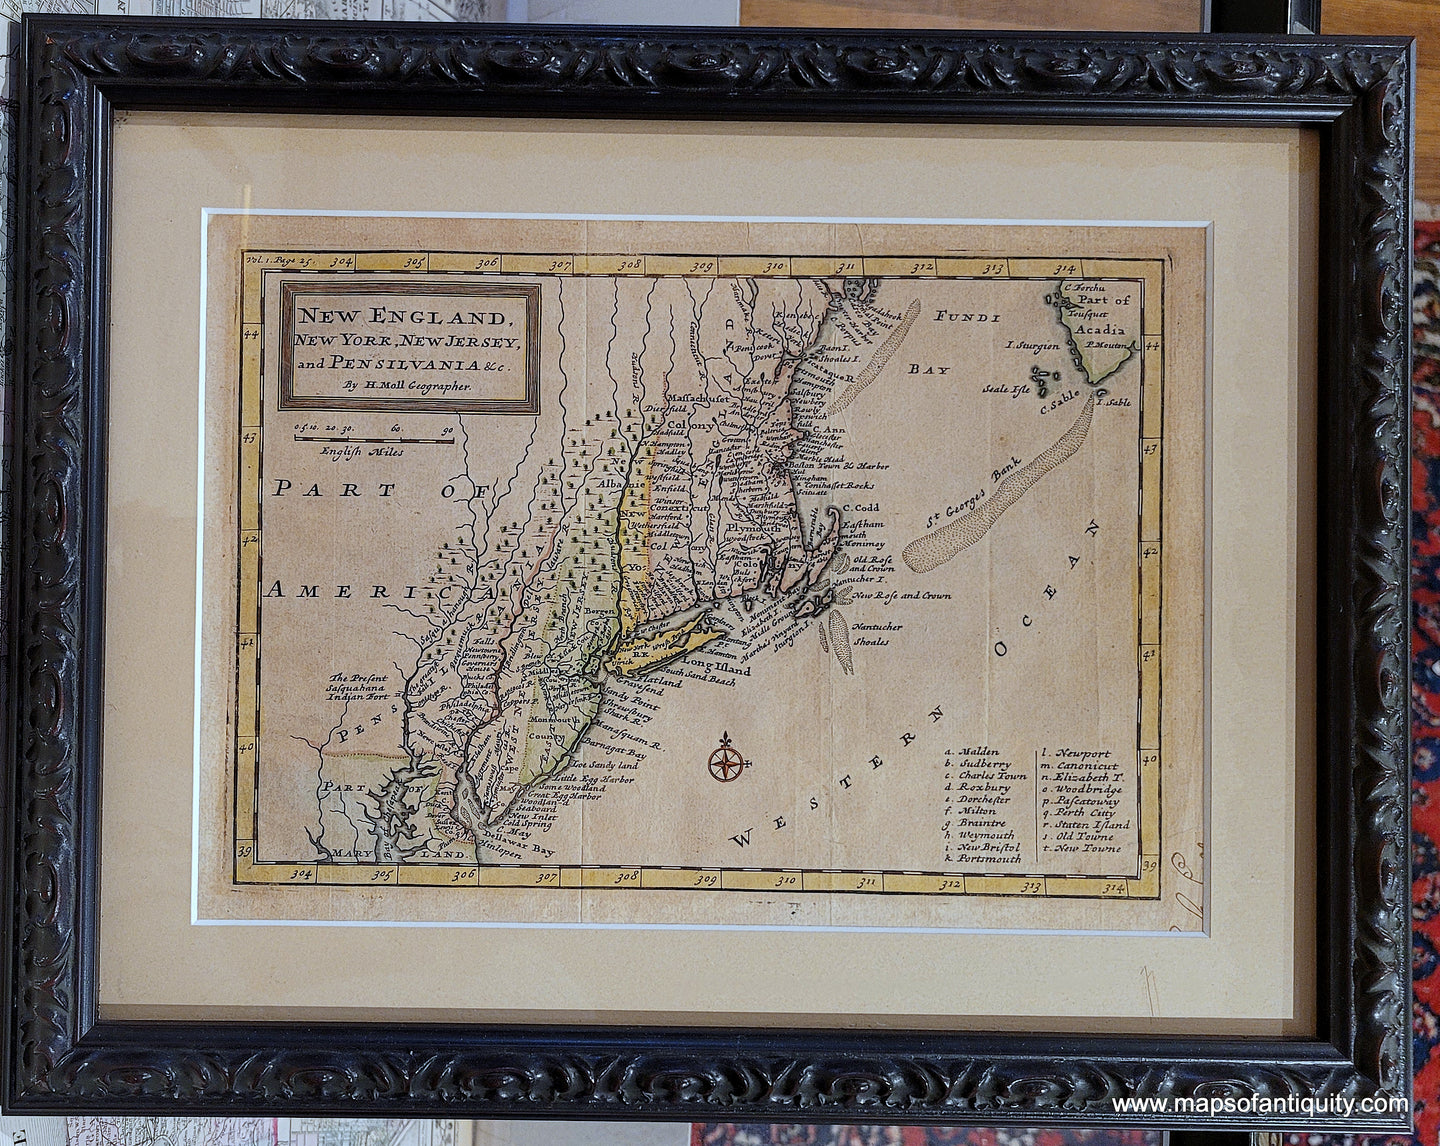 Genuine-Antique-Map-New-England-New-York-New-Jersey-and-Pensilvania-1708-Moll-Maps-Of-Antiquity